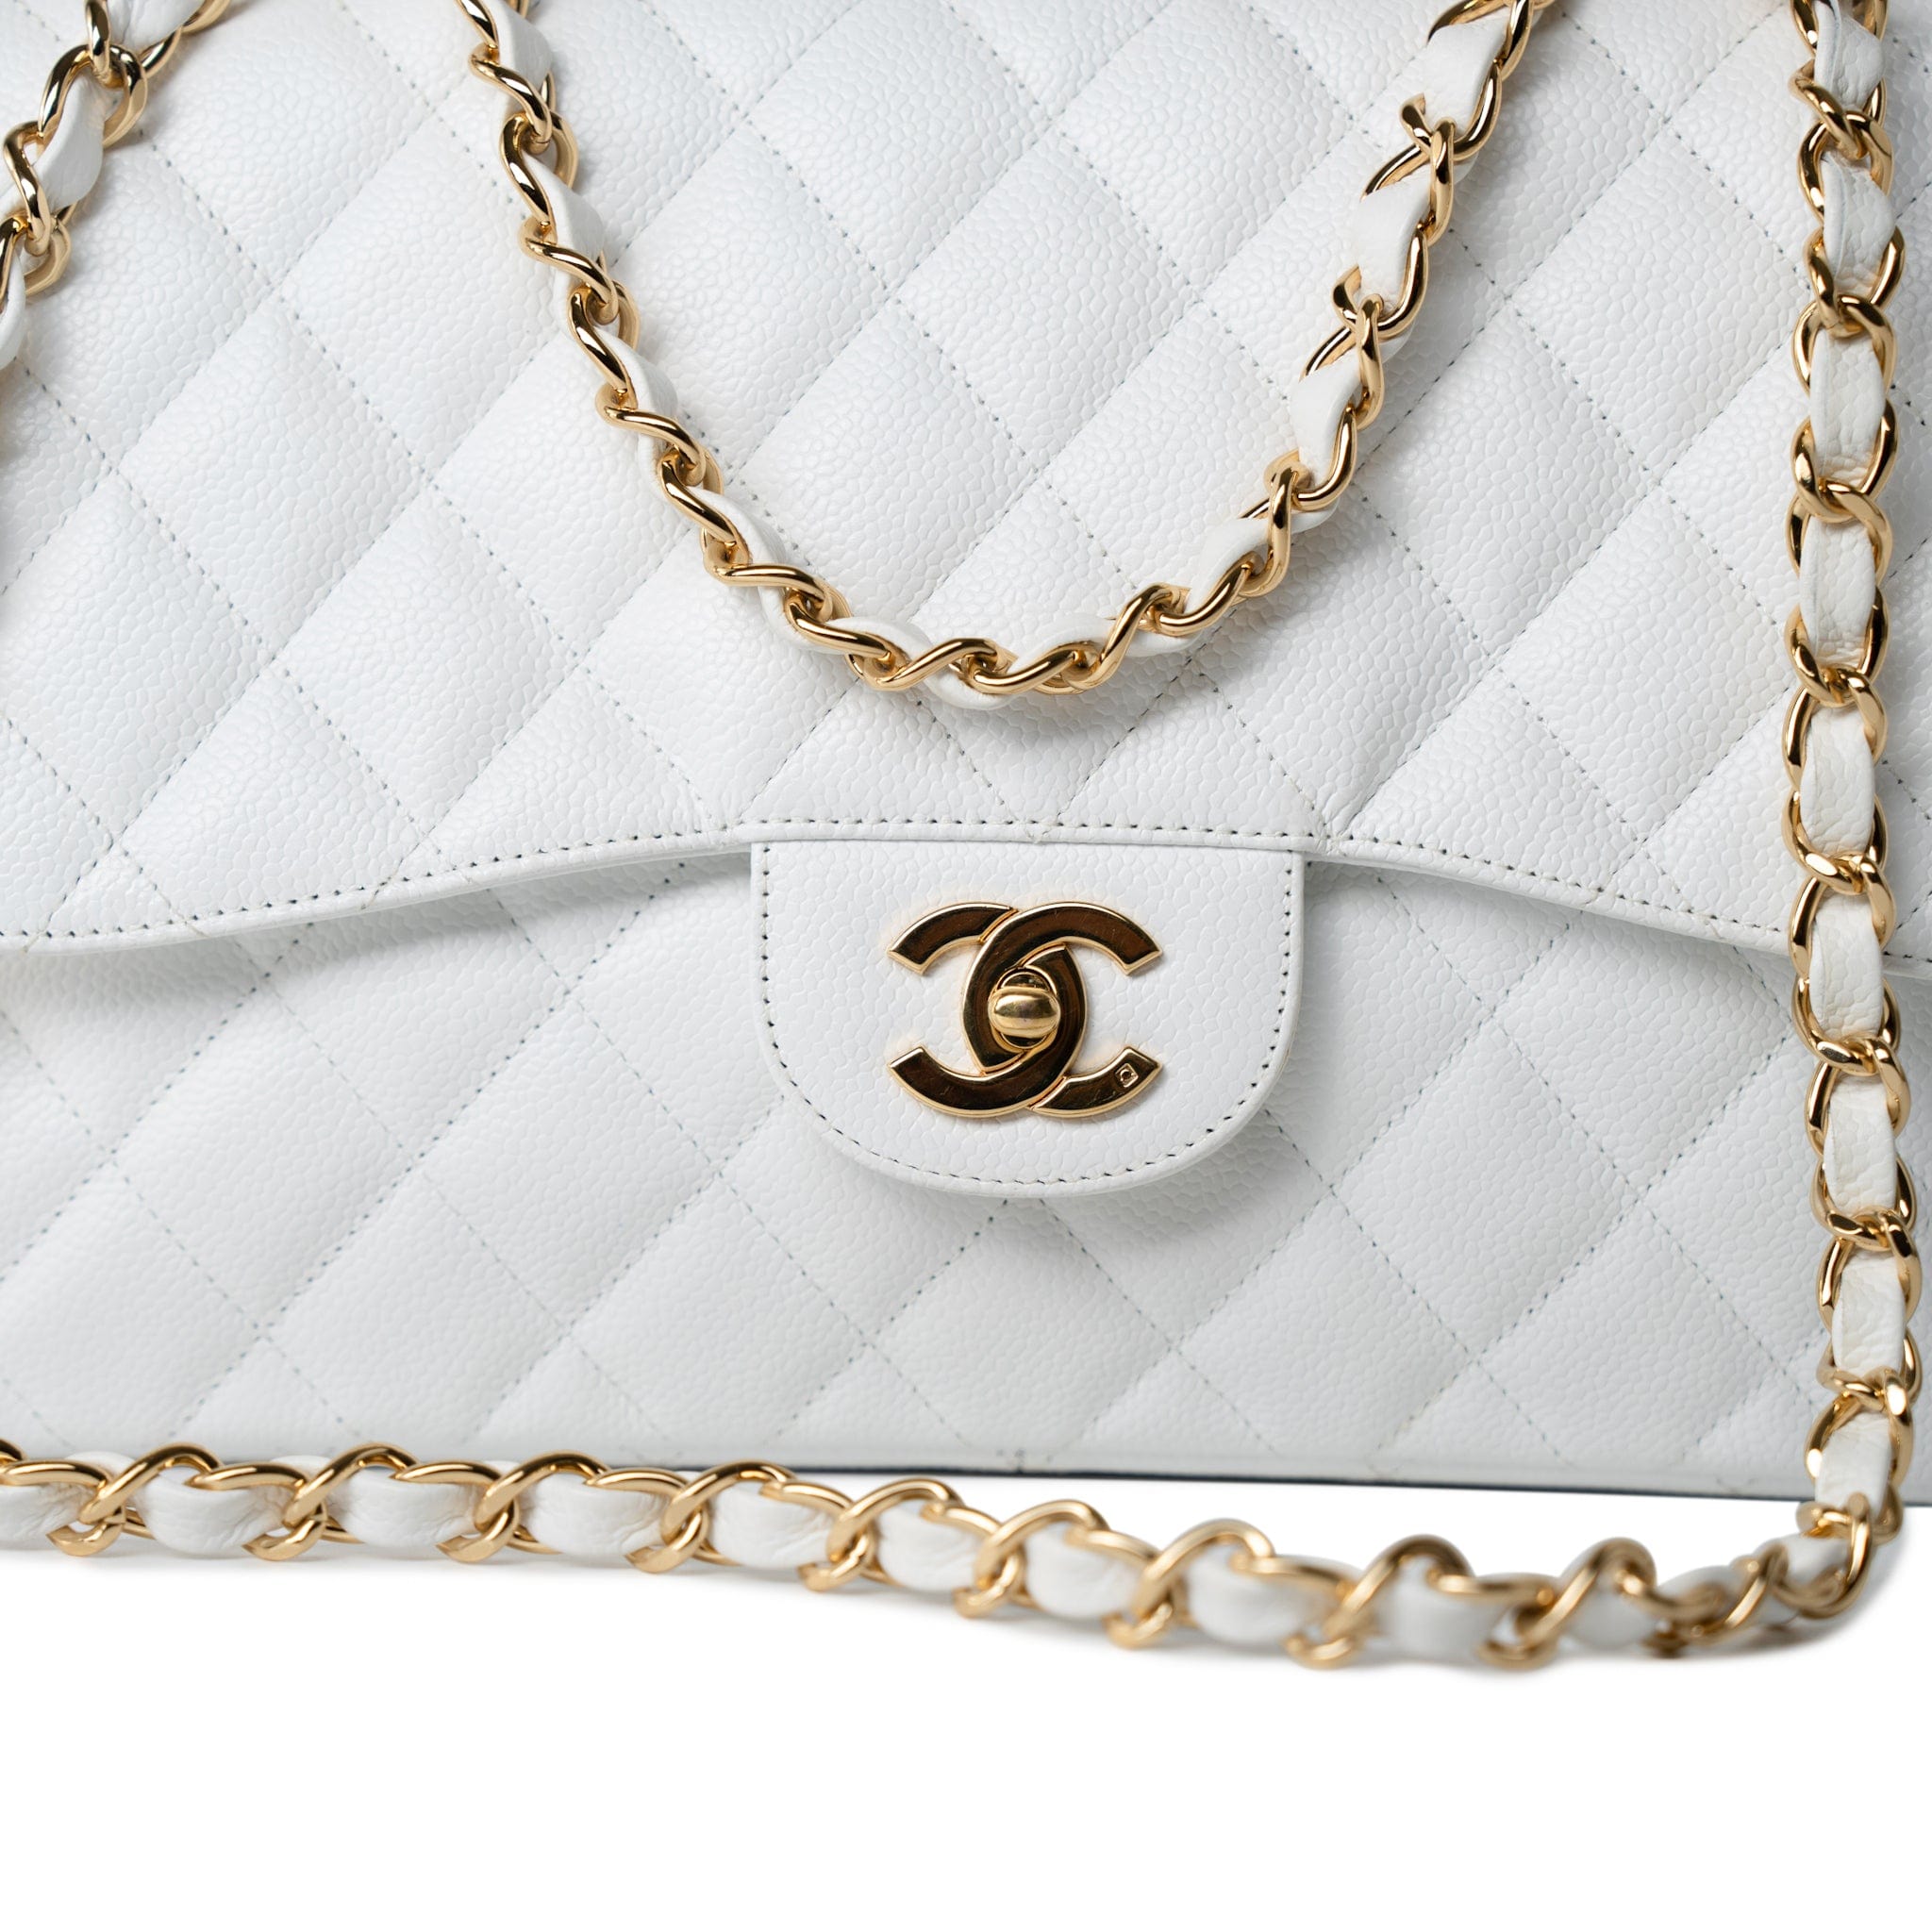 CHANEL Handbag White Caviar Quilted Jumbo Single Flap Gold Hardware - Redeluxe